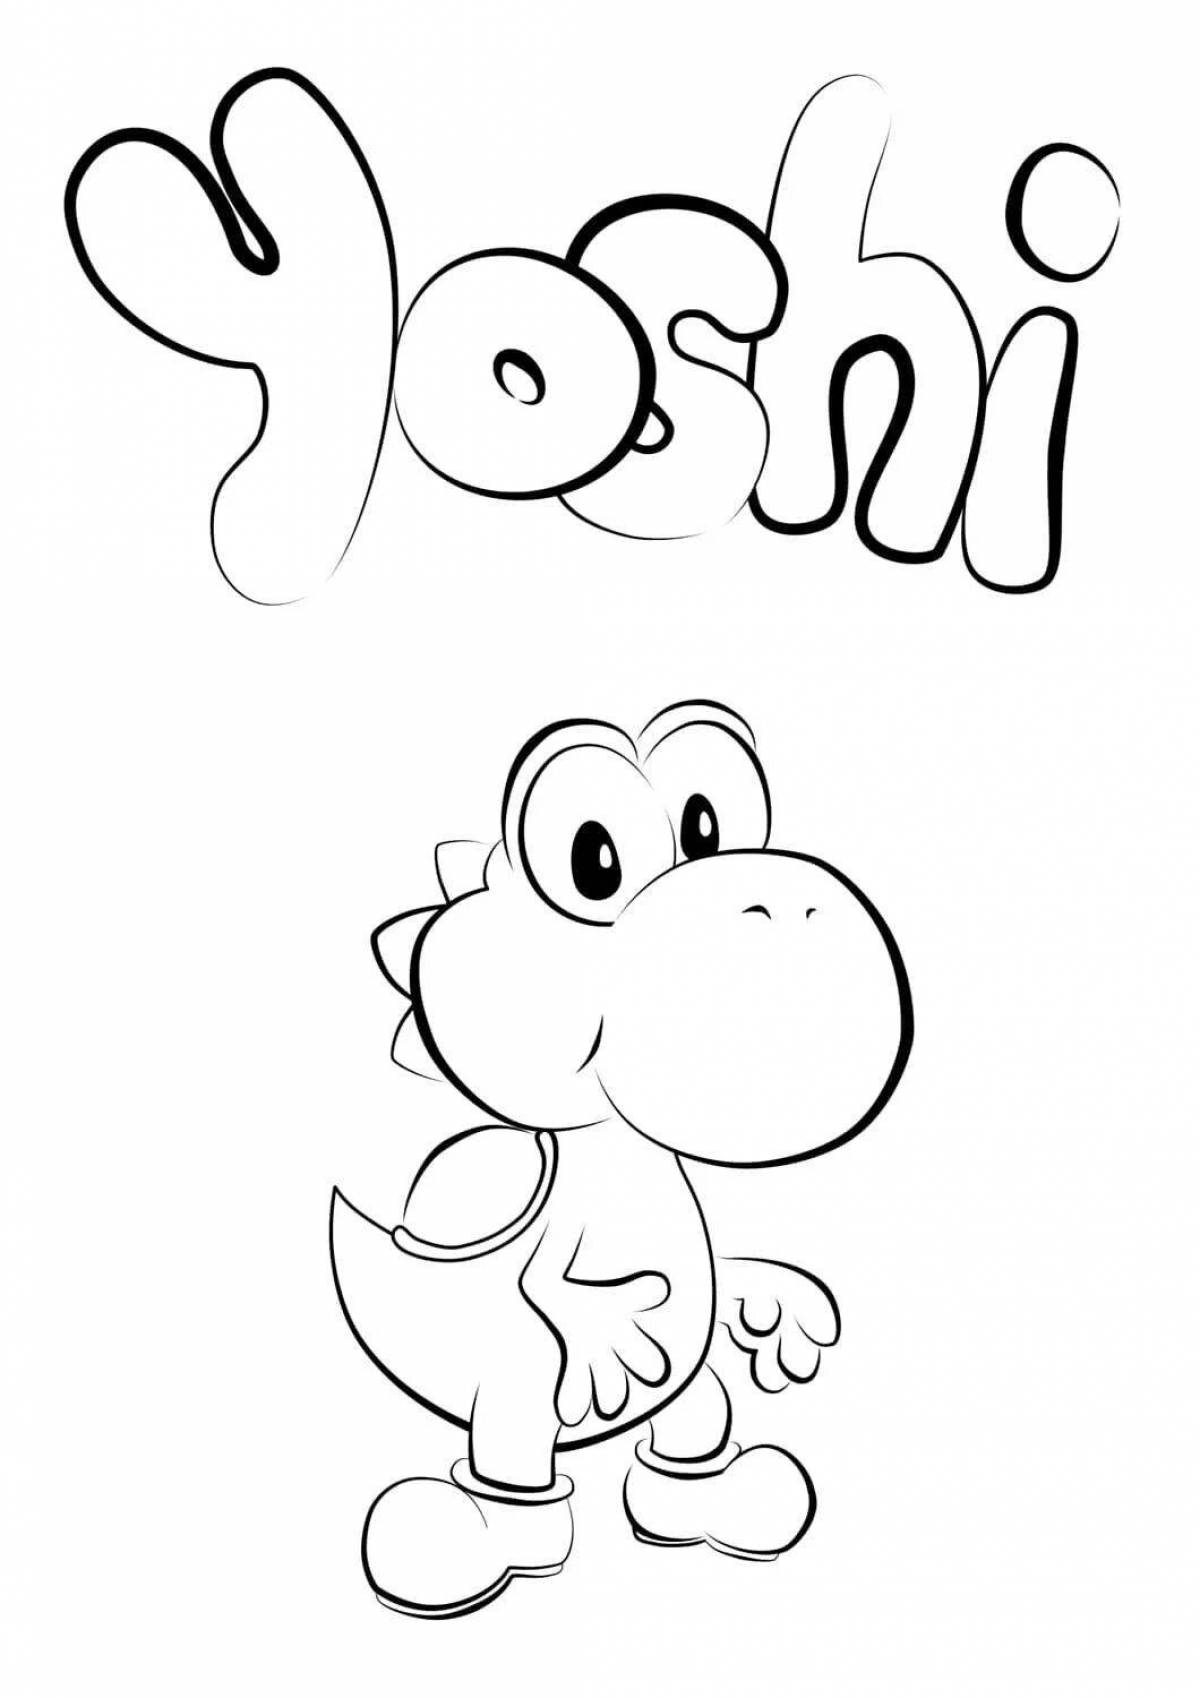 Delightful yoshi and lana coloring pages